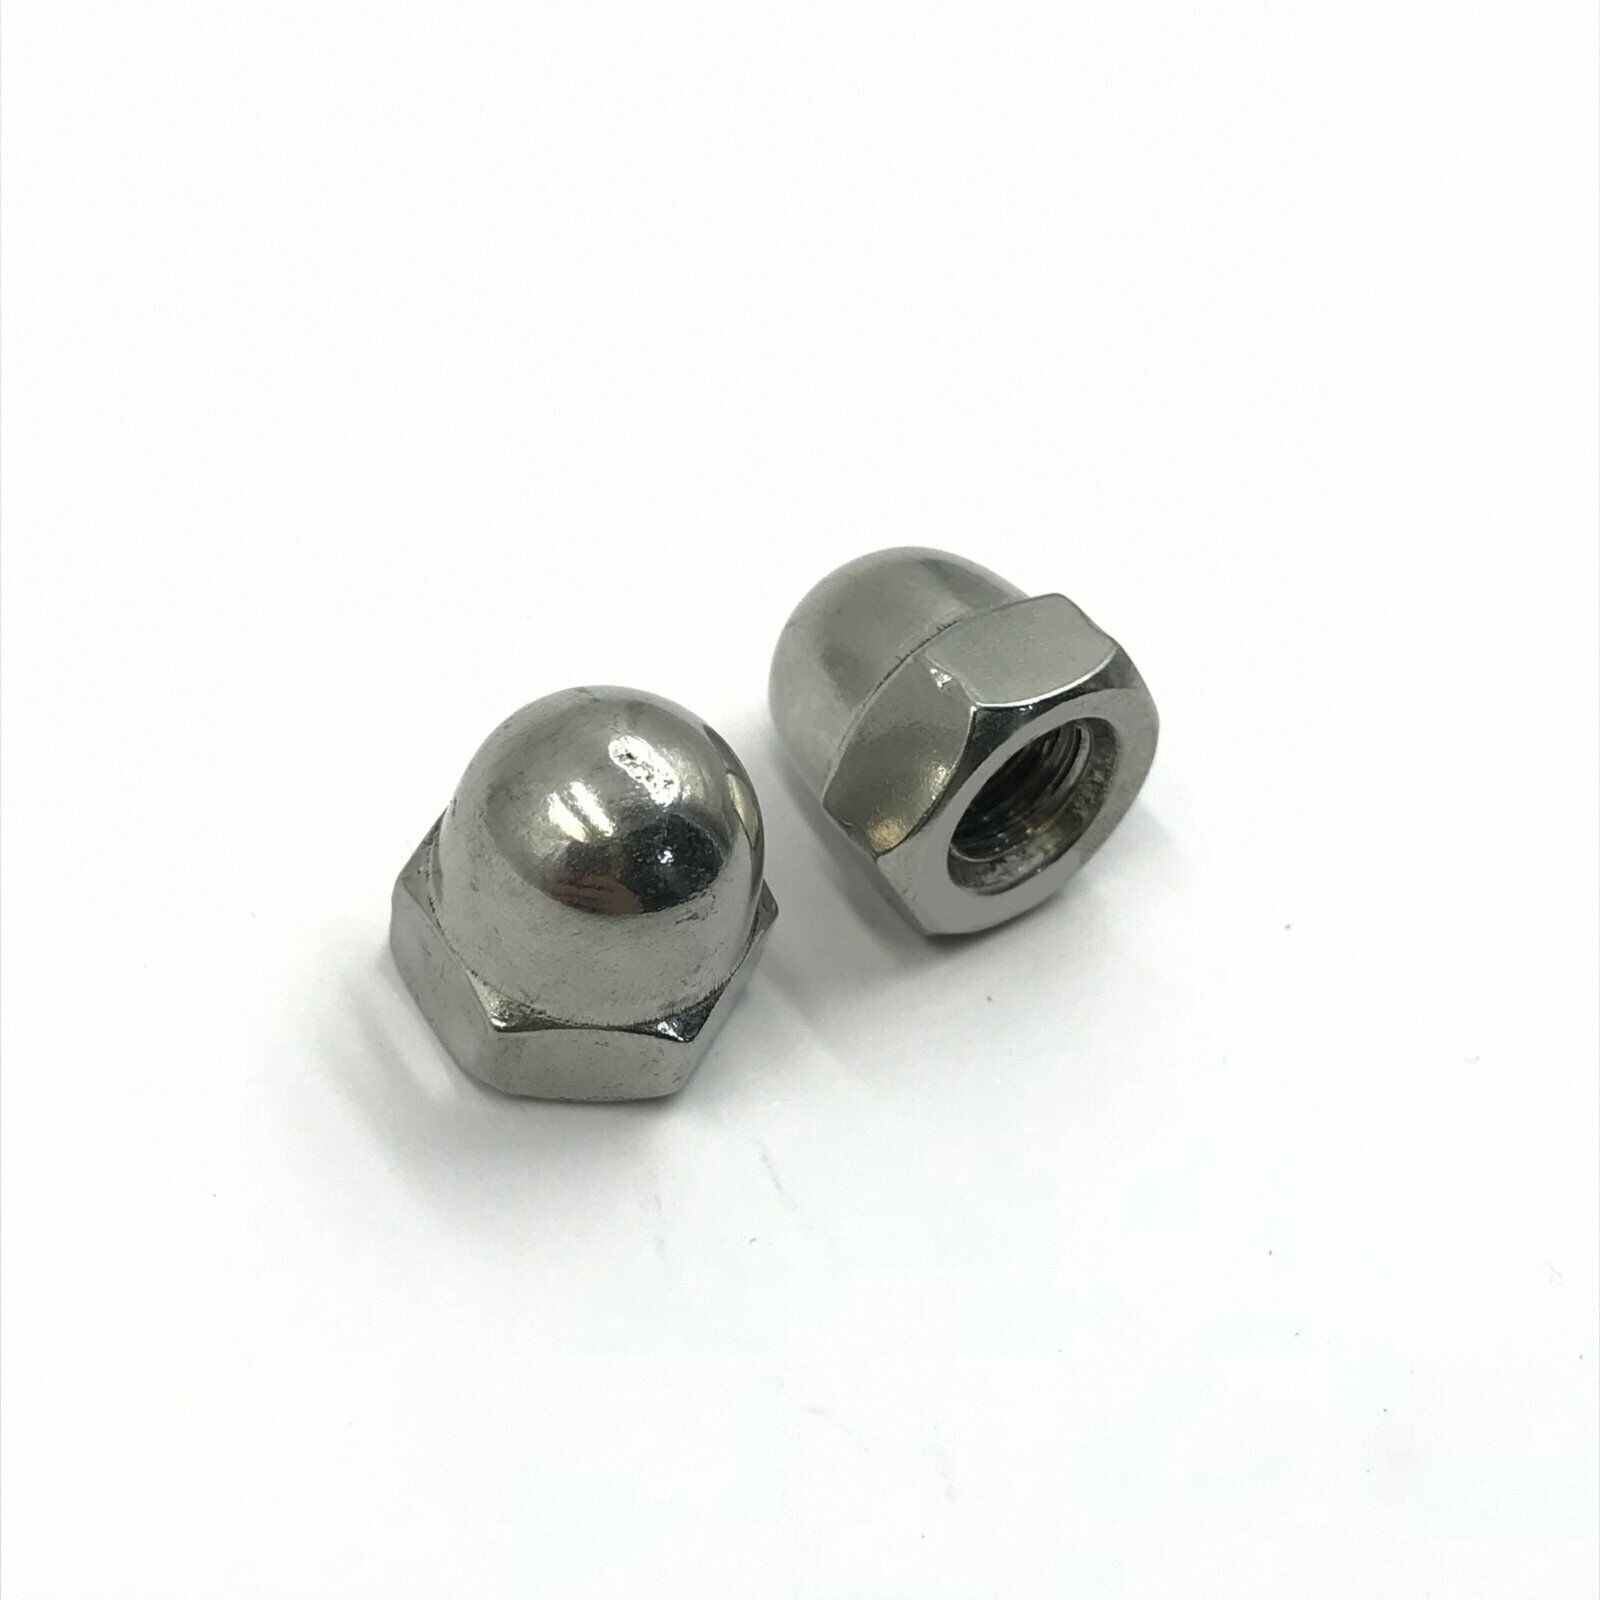 New 12Pcs M8 x 1.25 Stainless Steel Acorn Hex Nut Right Hand Thread [M1]